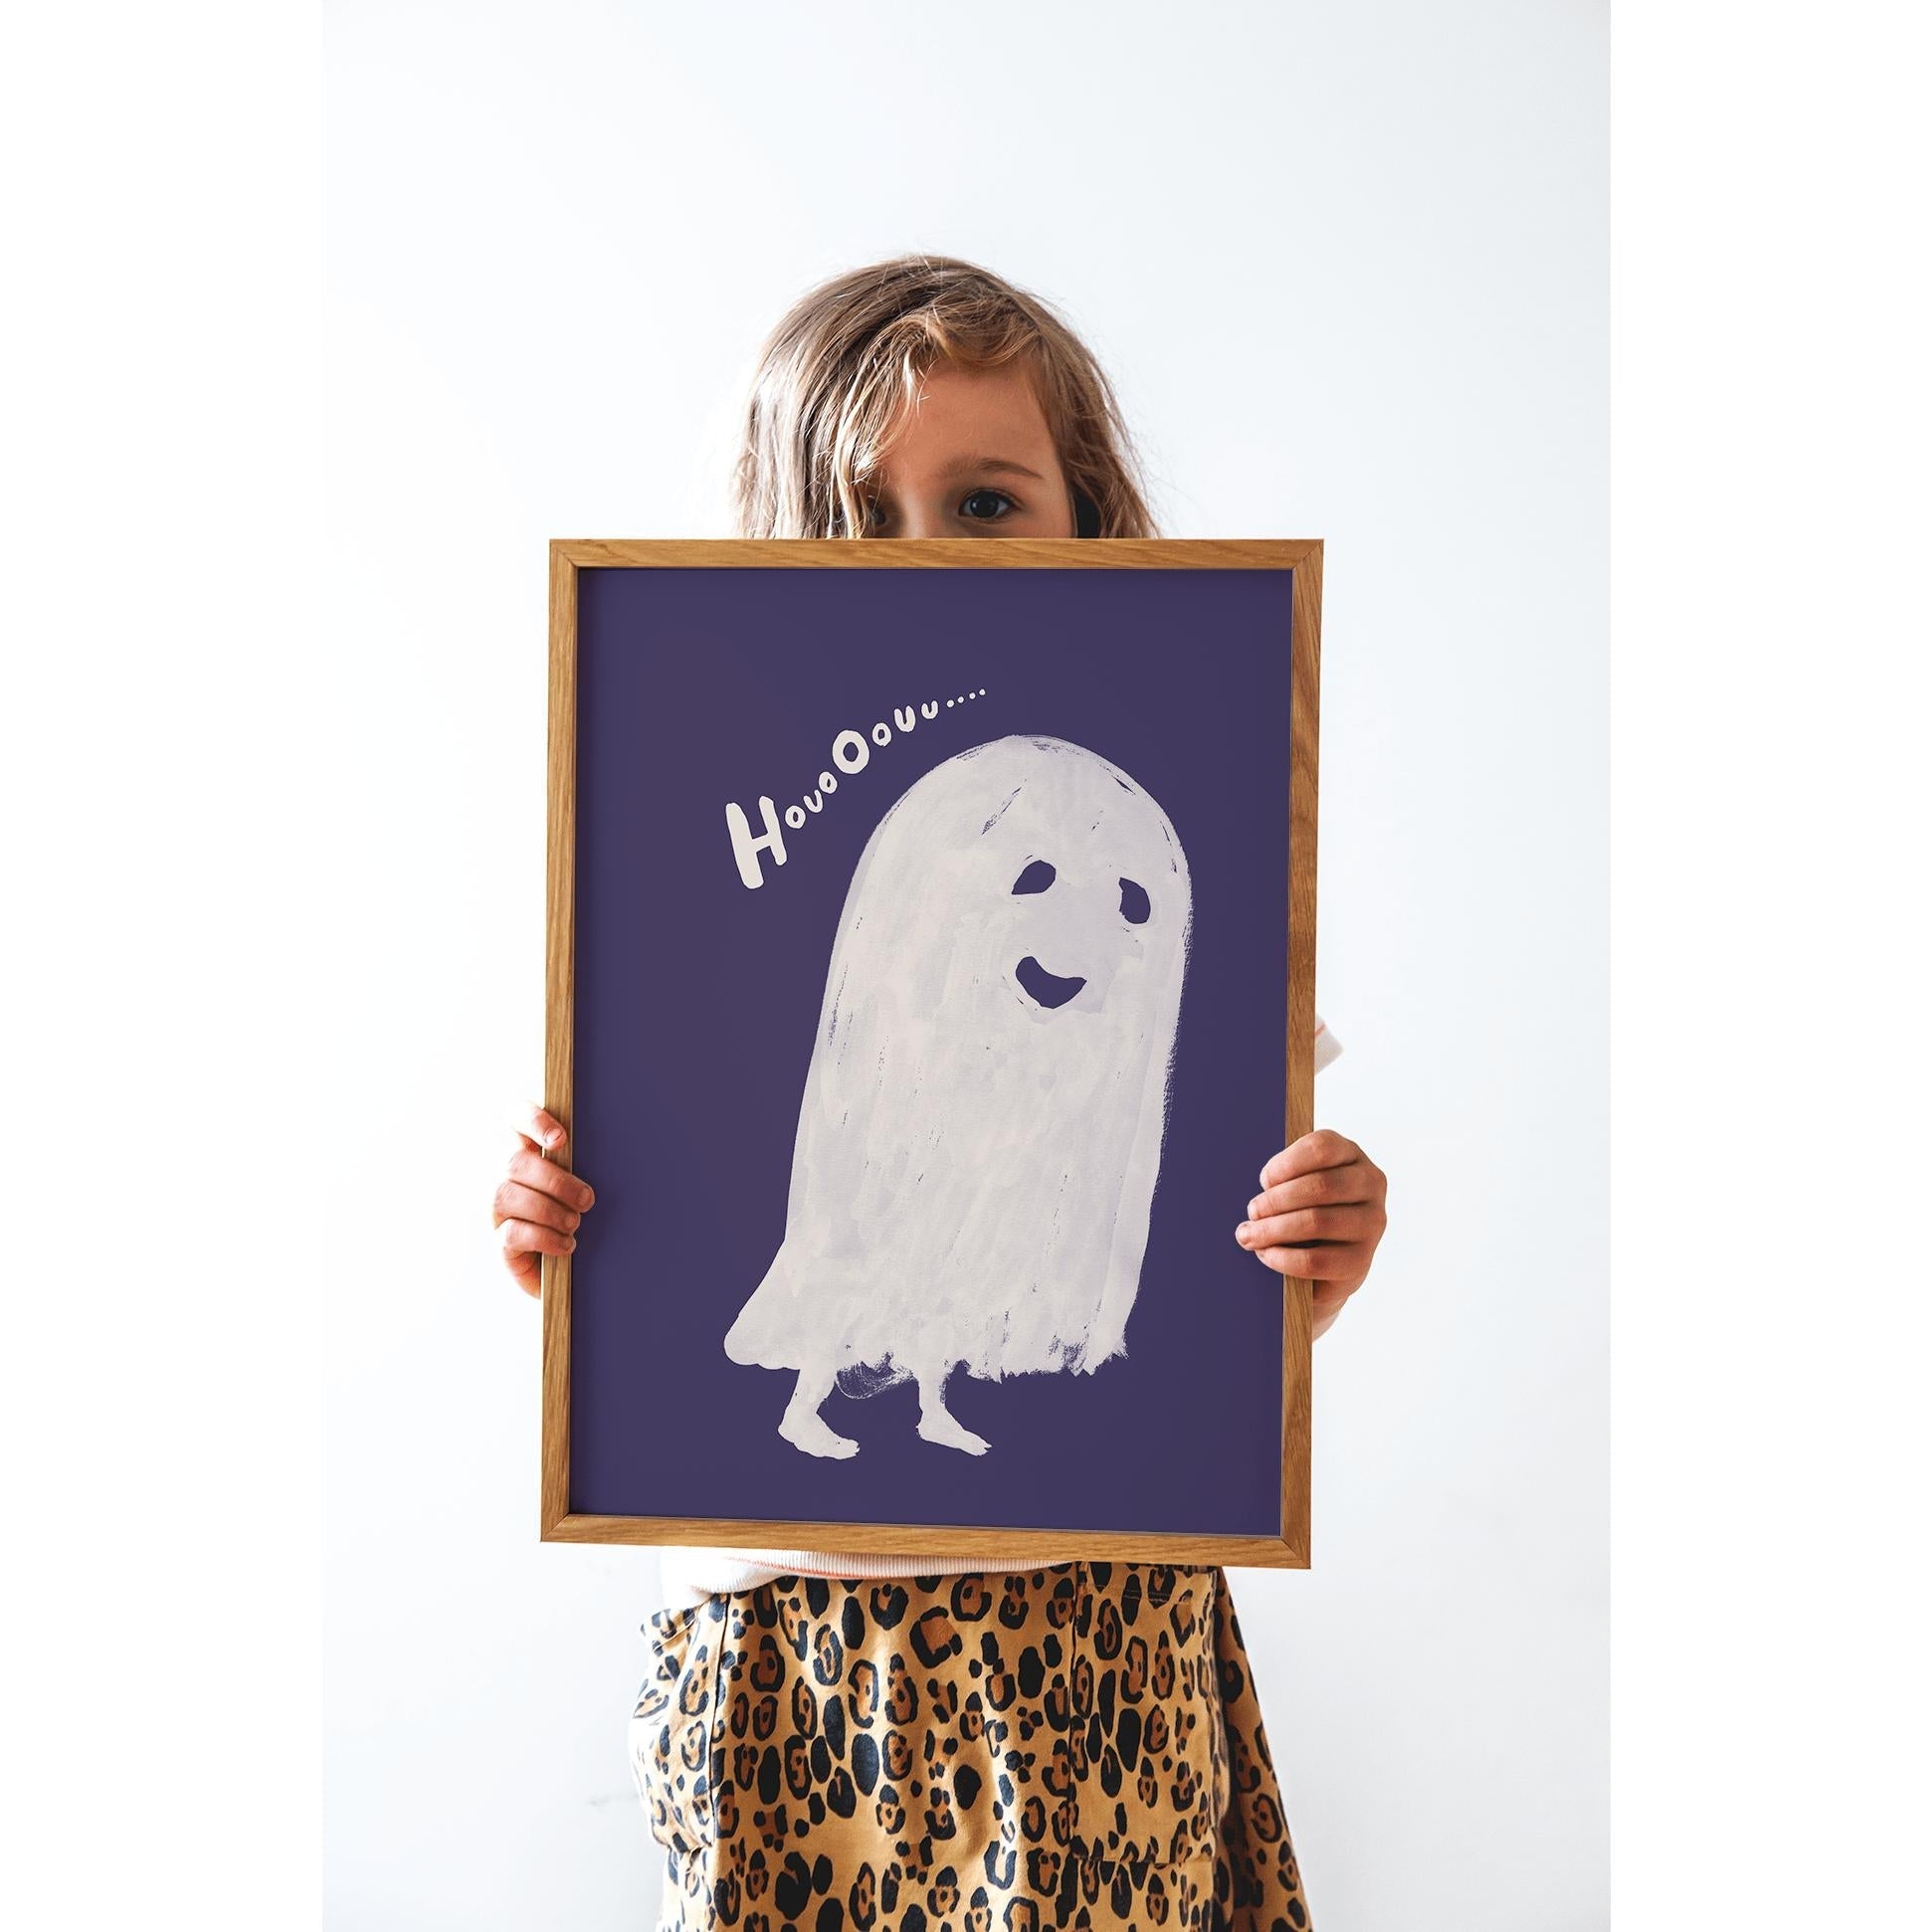 Paper Collective Houo Oouu Affiche 50x70 cm, blanc